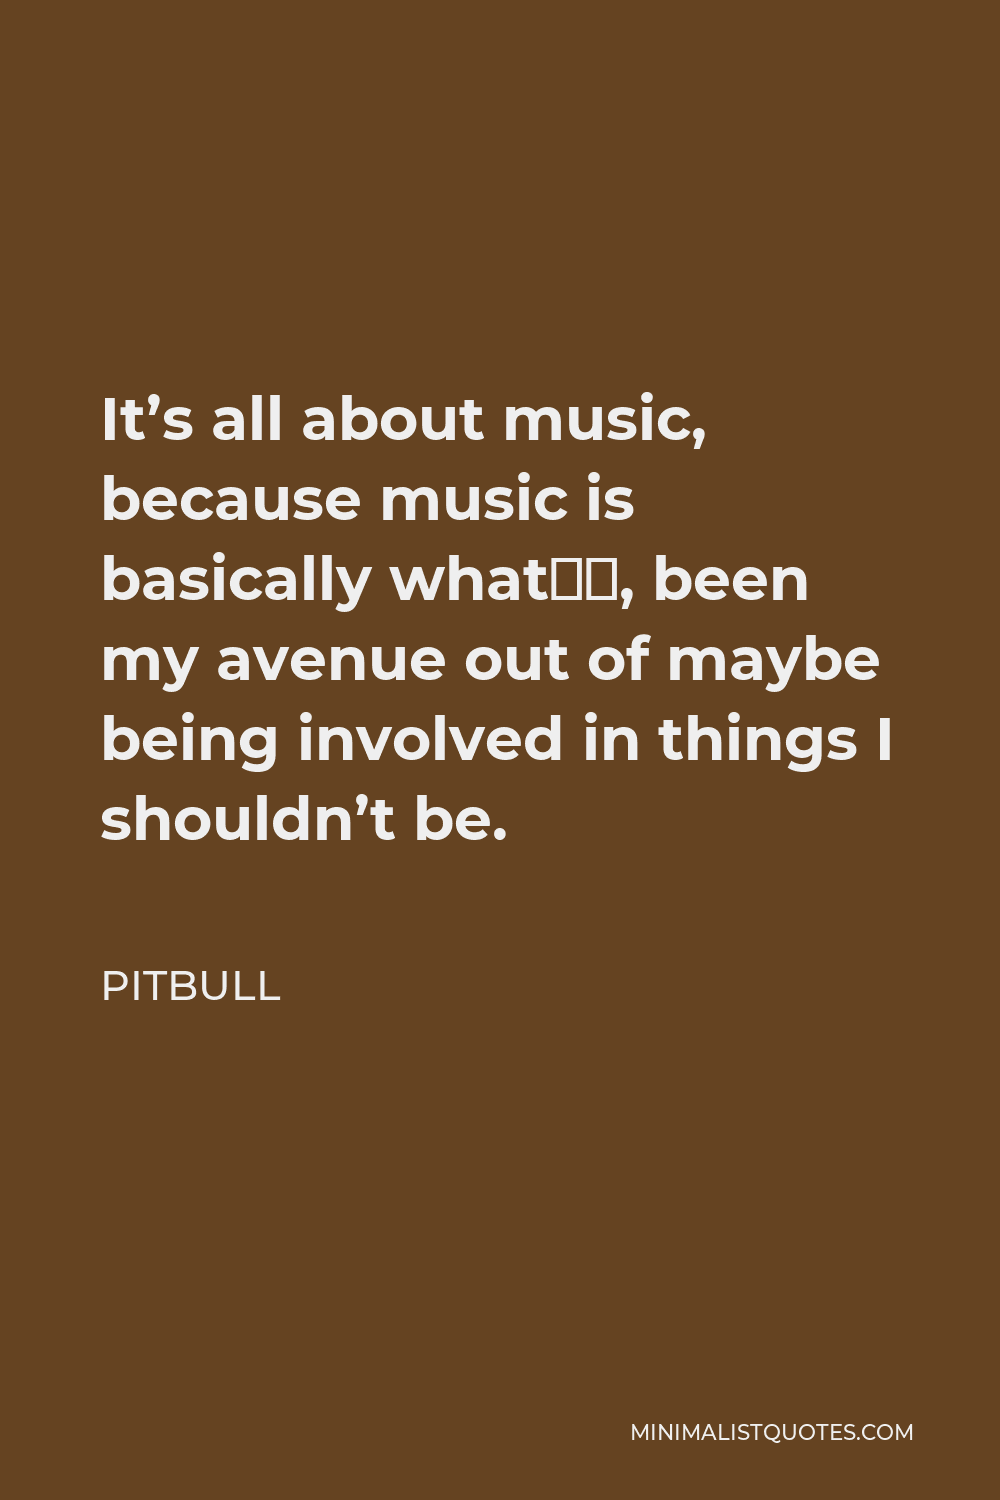 Pitbull Quote - It’s all about music, because music is basically what’s, been my avenue out of maybe being involved in things I shouldn’t be.